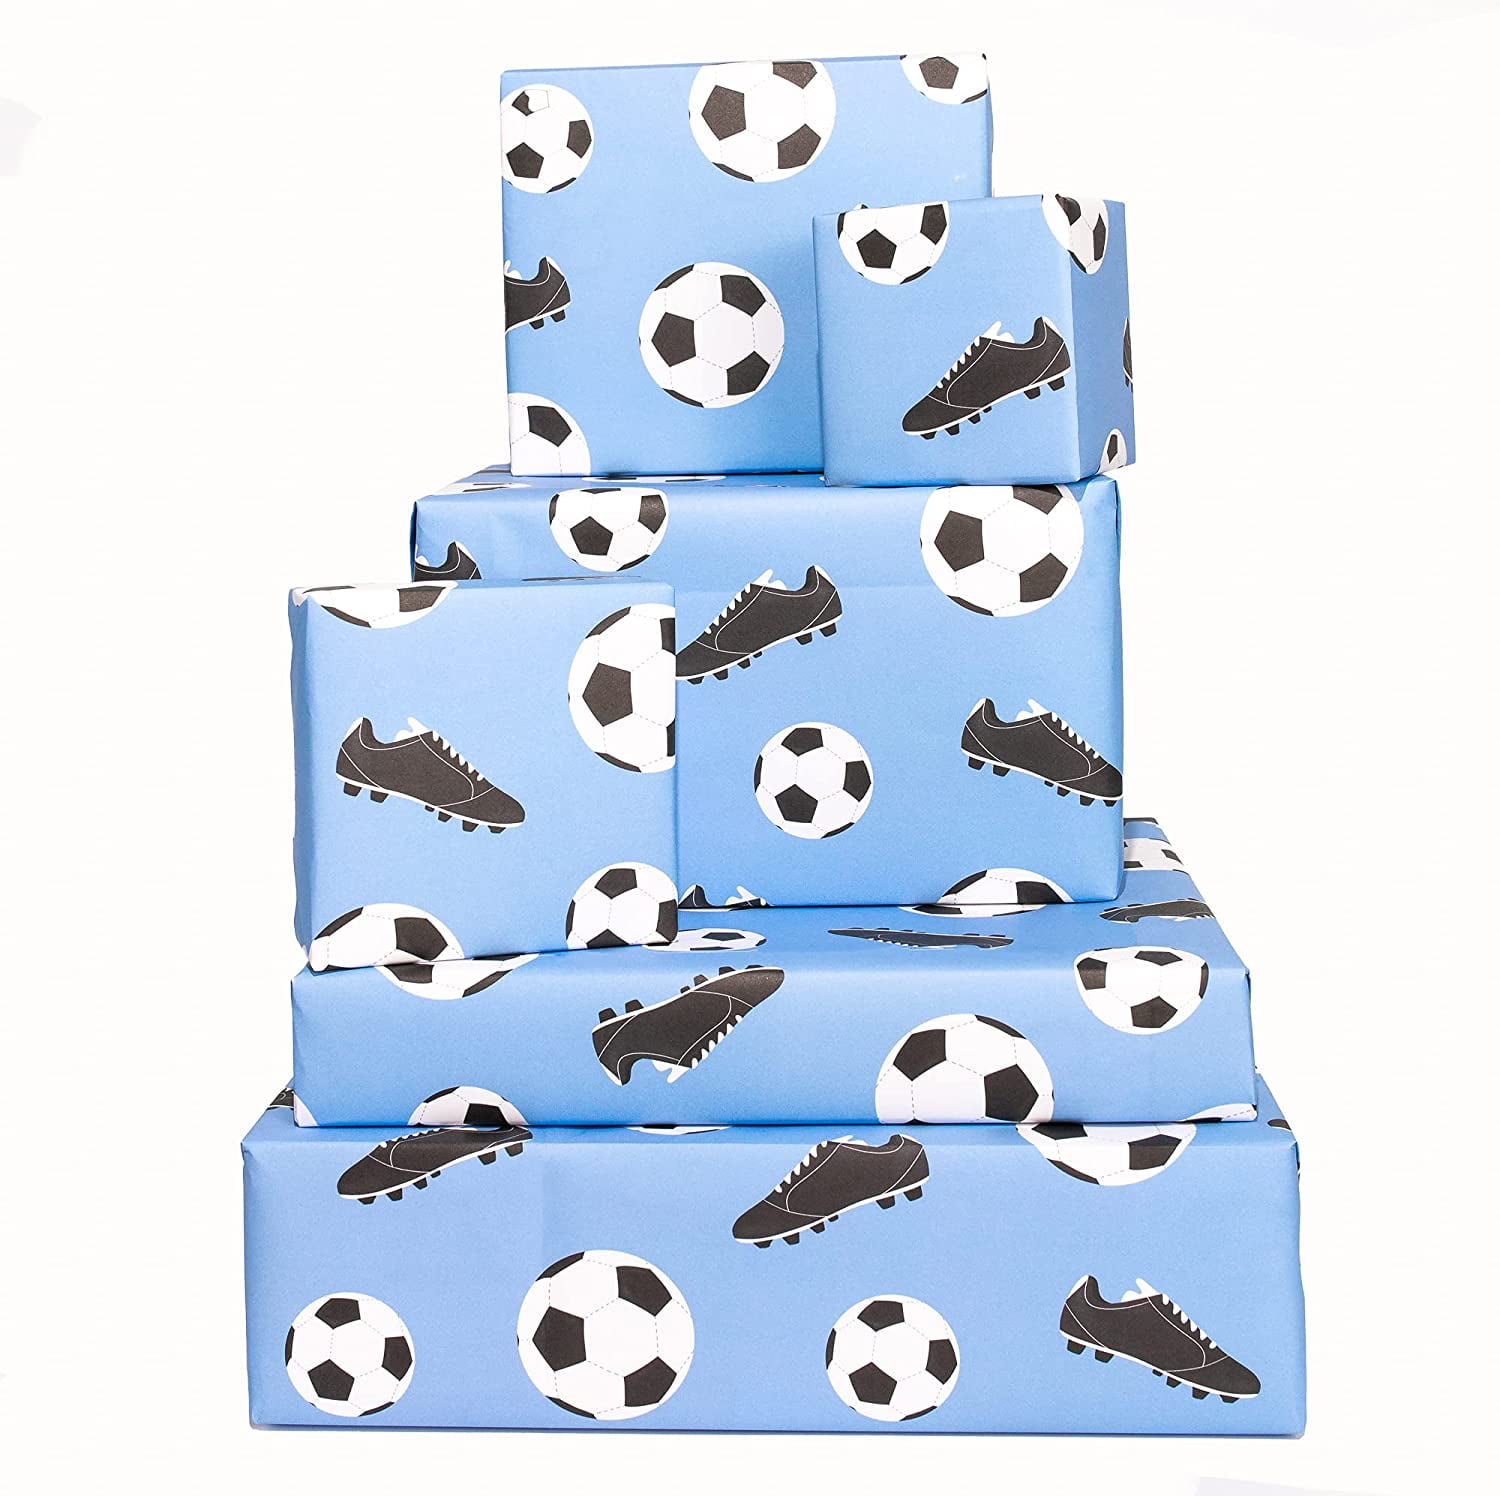 Central 23 Baby Boy Wrapping Paper - Baby Shower Wrapping Paper Girl - 6 Sheets White Gift Wrap - Cute Animals - Comes with Fun Stickers